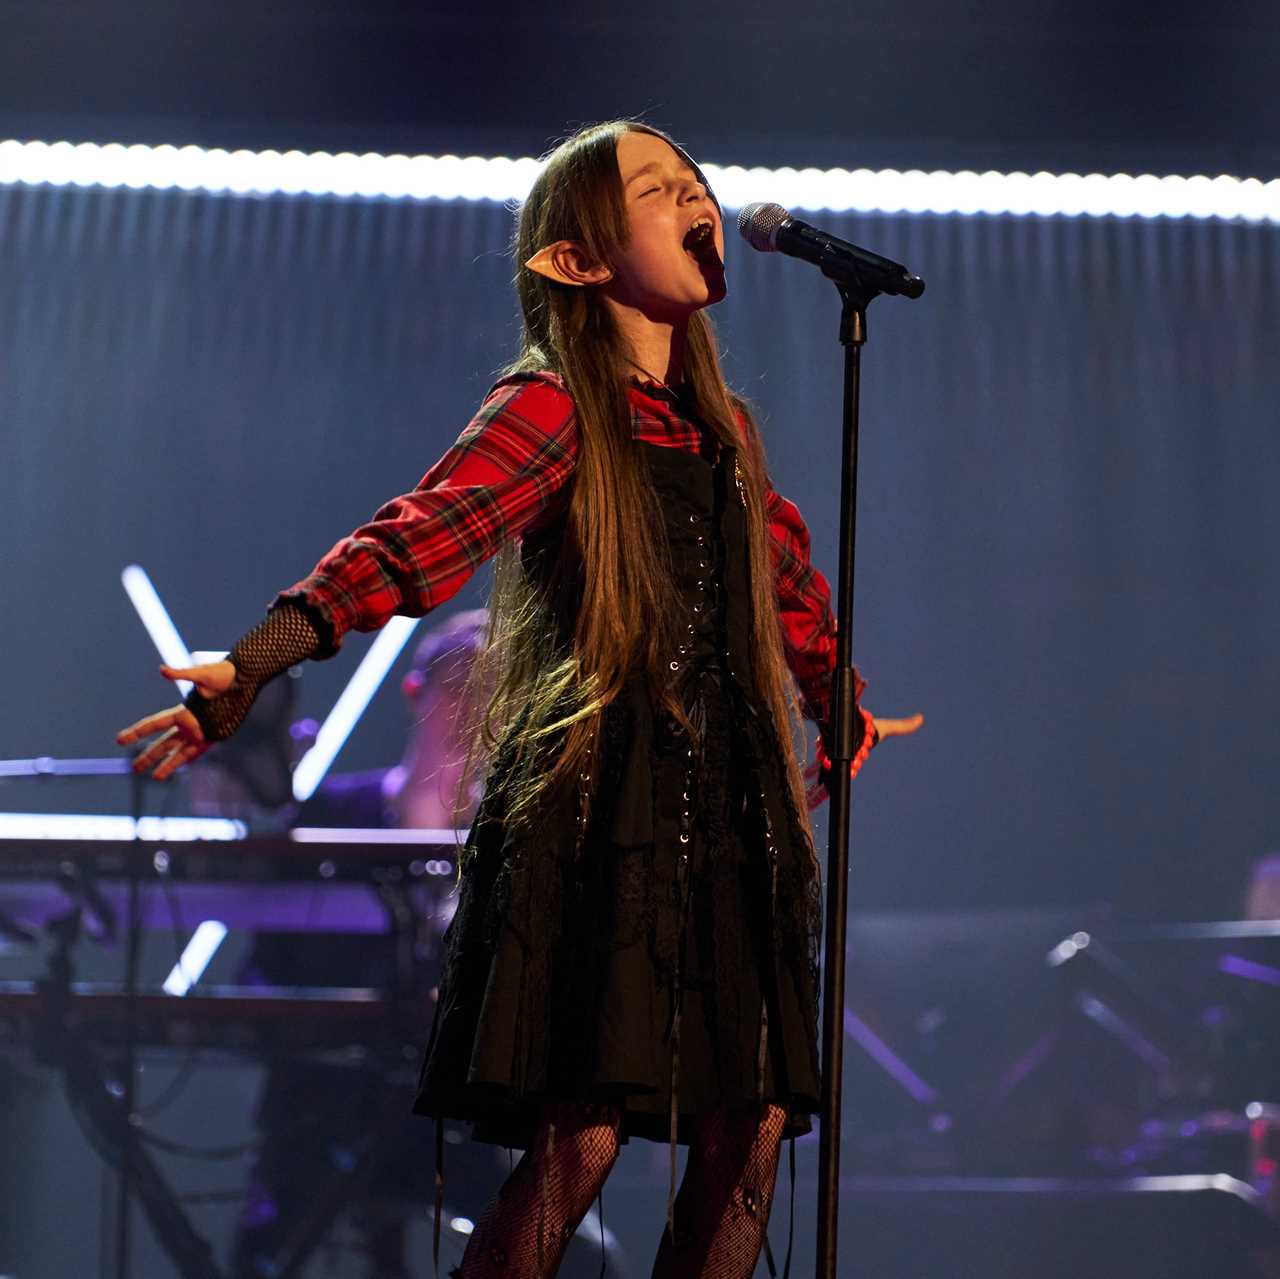 The Voice Kids viewers furious as ‘elf girl’ Olga is ‘robbed’ during audition